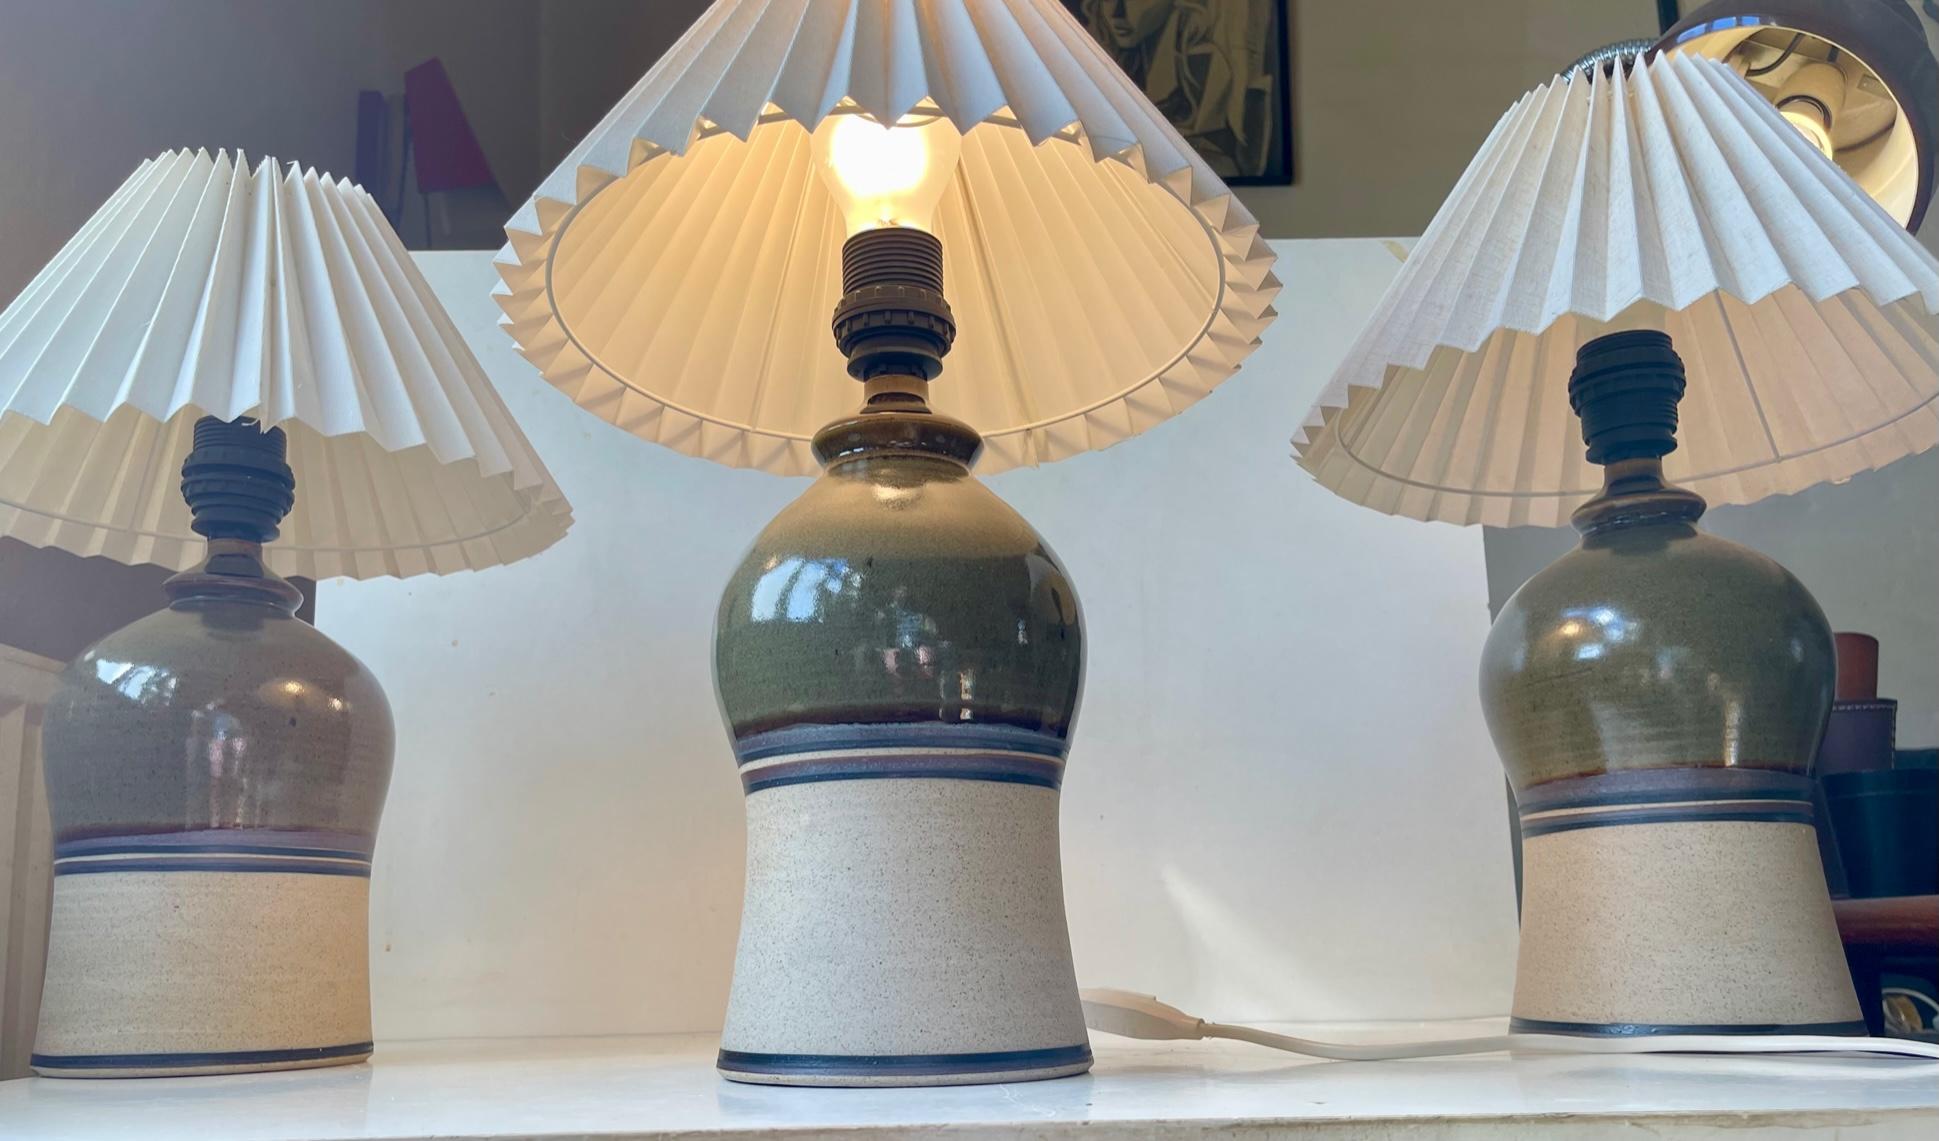 Matching set of 3 large stoneware table lights with white fluted Danish shades. Olive green main glazed highlighted with blue and earthy stripes. Studio-made by Hanne Bertelsenm in Denmark circa 1990 in the style of Tue Poulsen and Søholm.